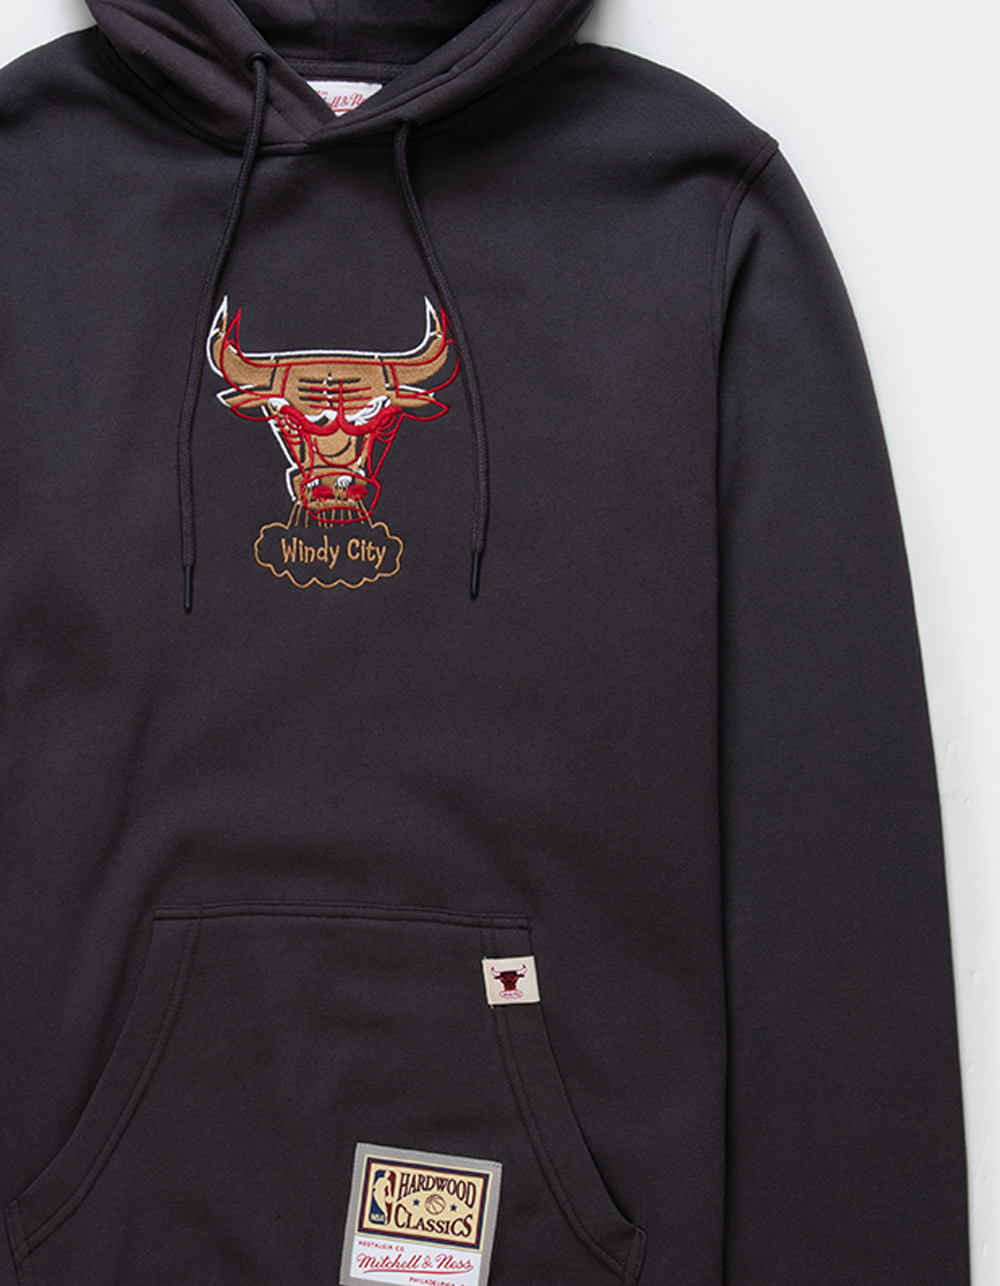 Just a picture of our Center wearing a Chicago hoodie : r/chicagobulls